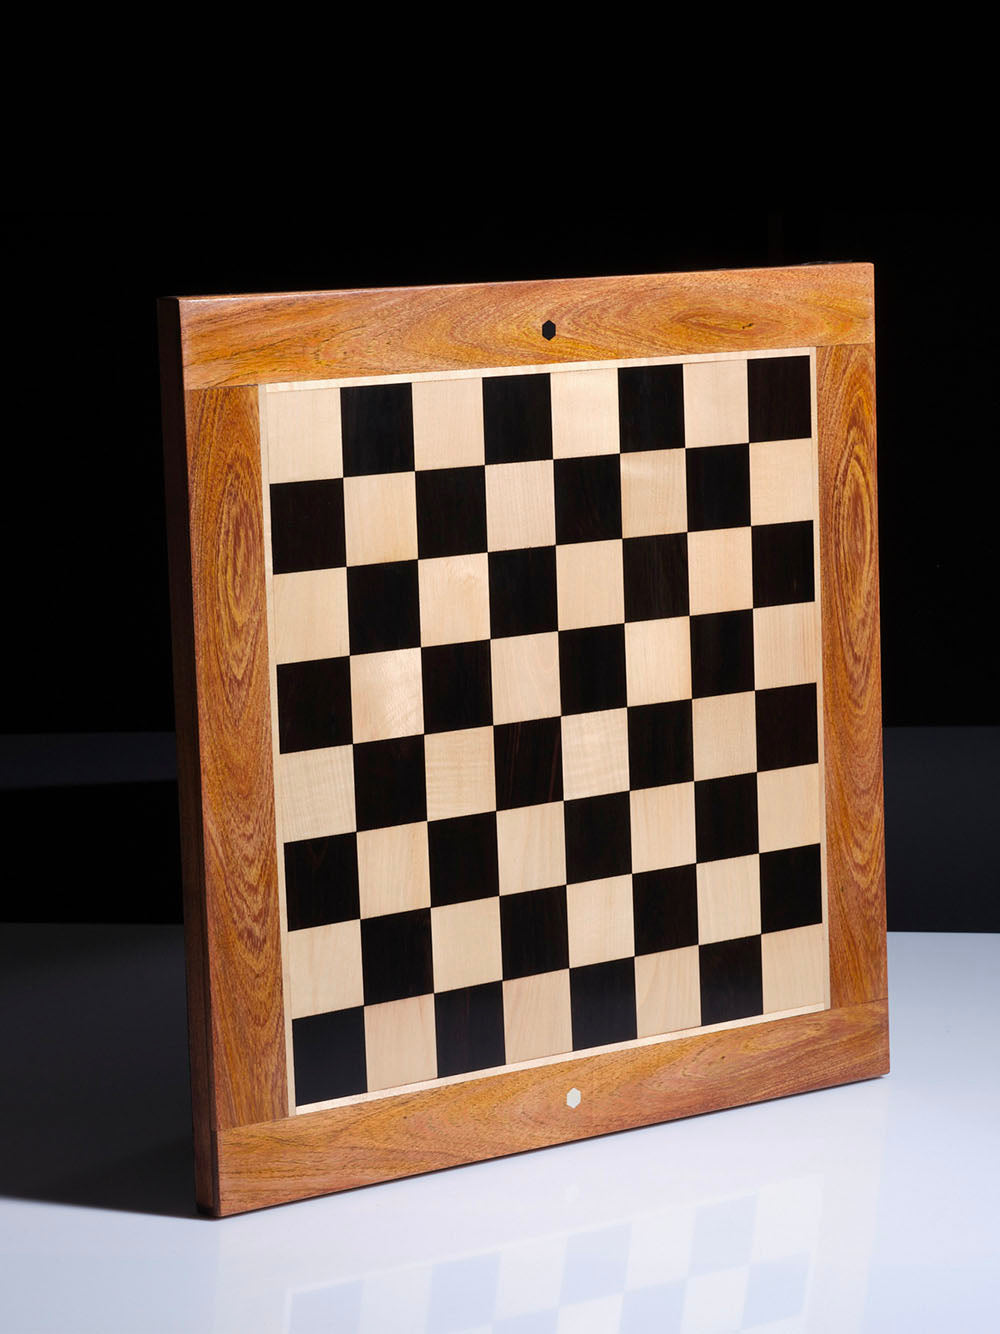 the STACK Chessboard - Tournament Edition in Wenge and Maple  US-JLPSTKBD225WG Online Sale 